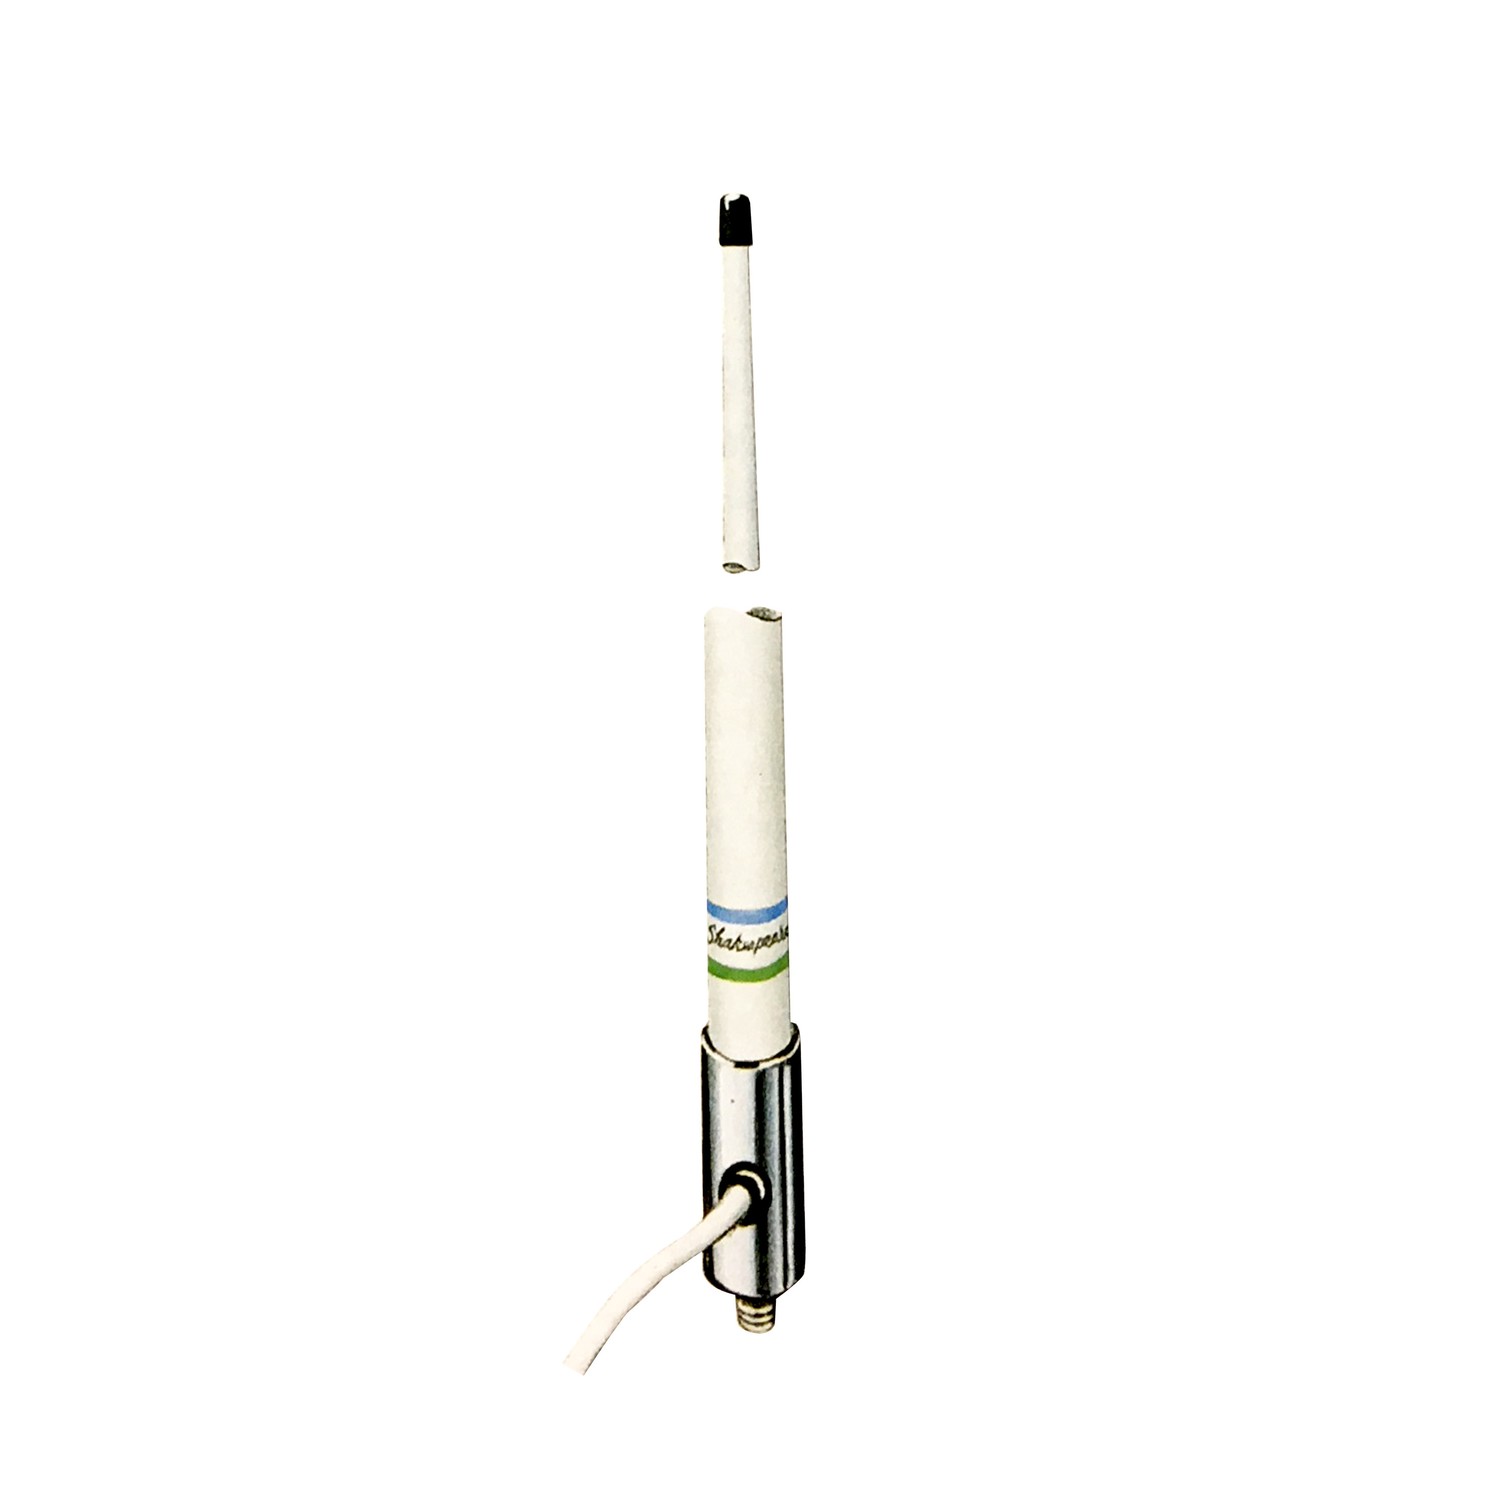 Shakespeare -  5302-R 8' Foot Vhf/Loran Combination Marine Antenna With 15' Rg58 Coax Cable & Pl259 Connector